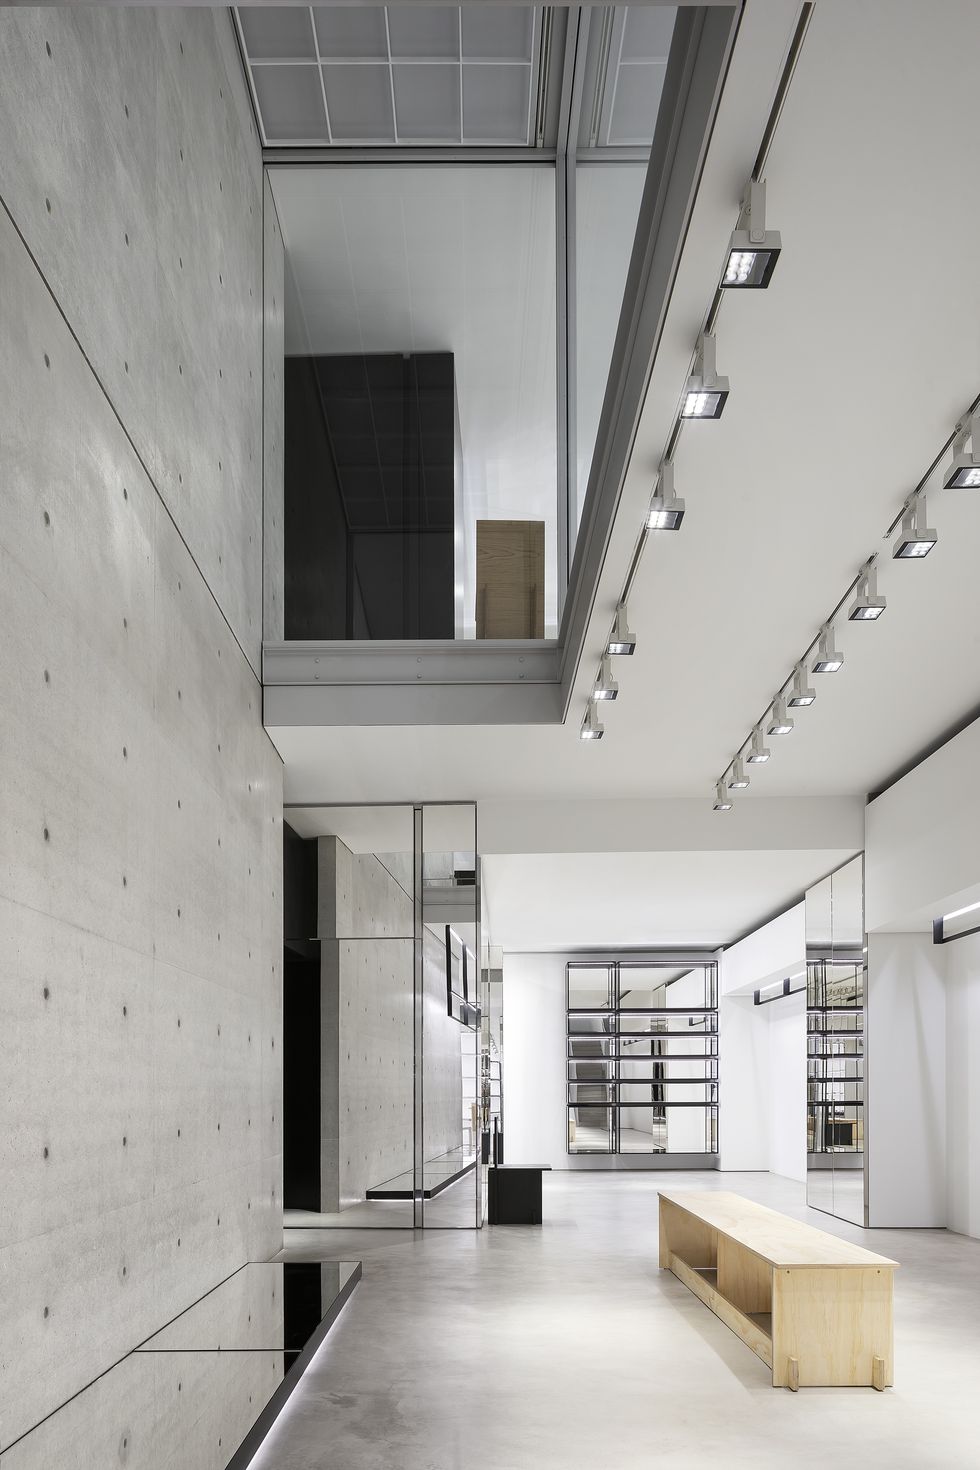 Architecture, Interior design, Property, Floor, Wall, Ceiling, Room, Stairs, Fixture, Concrete, 